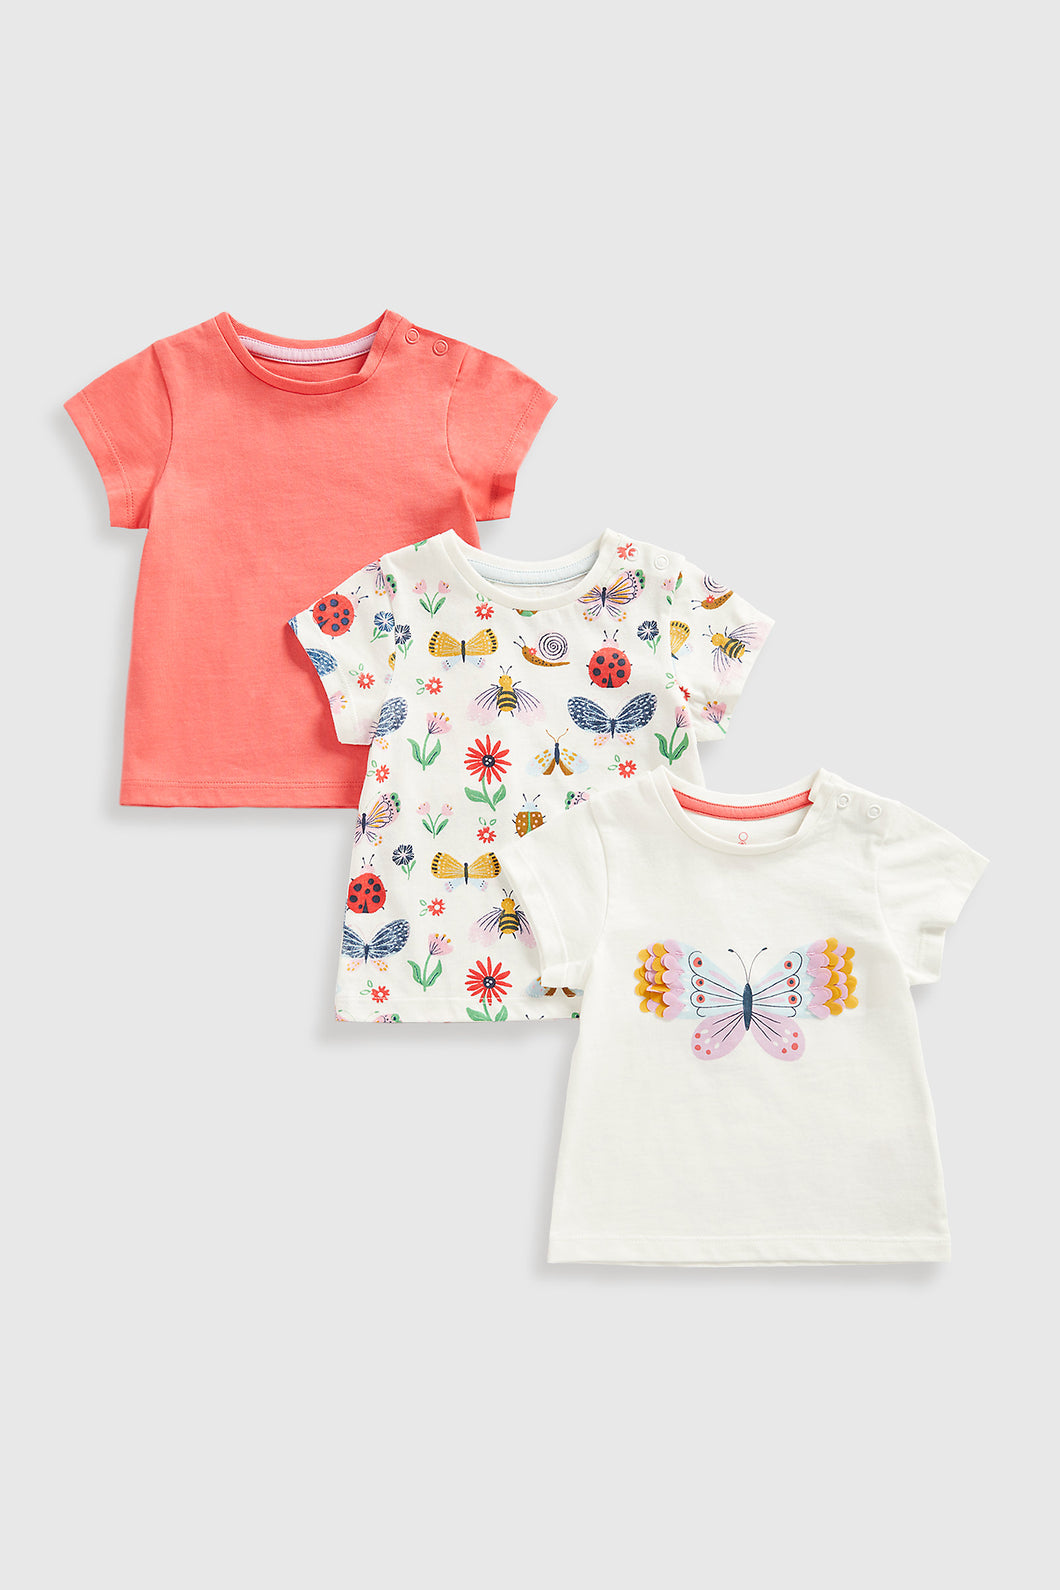 Mothercare Nature T-Shirts - 3 Pack